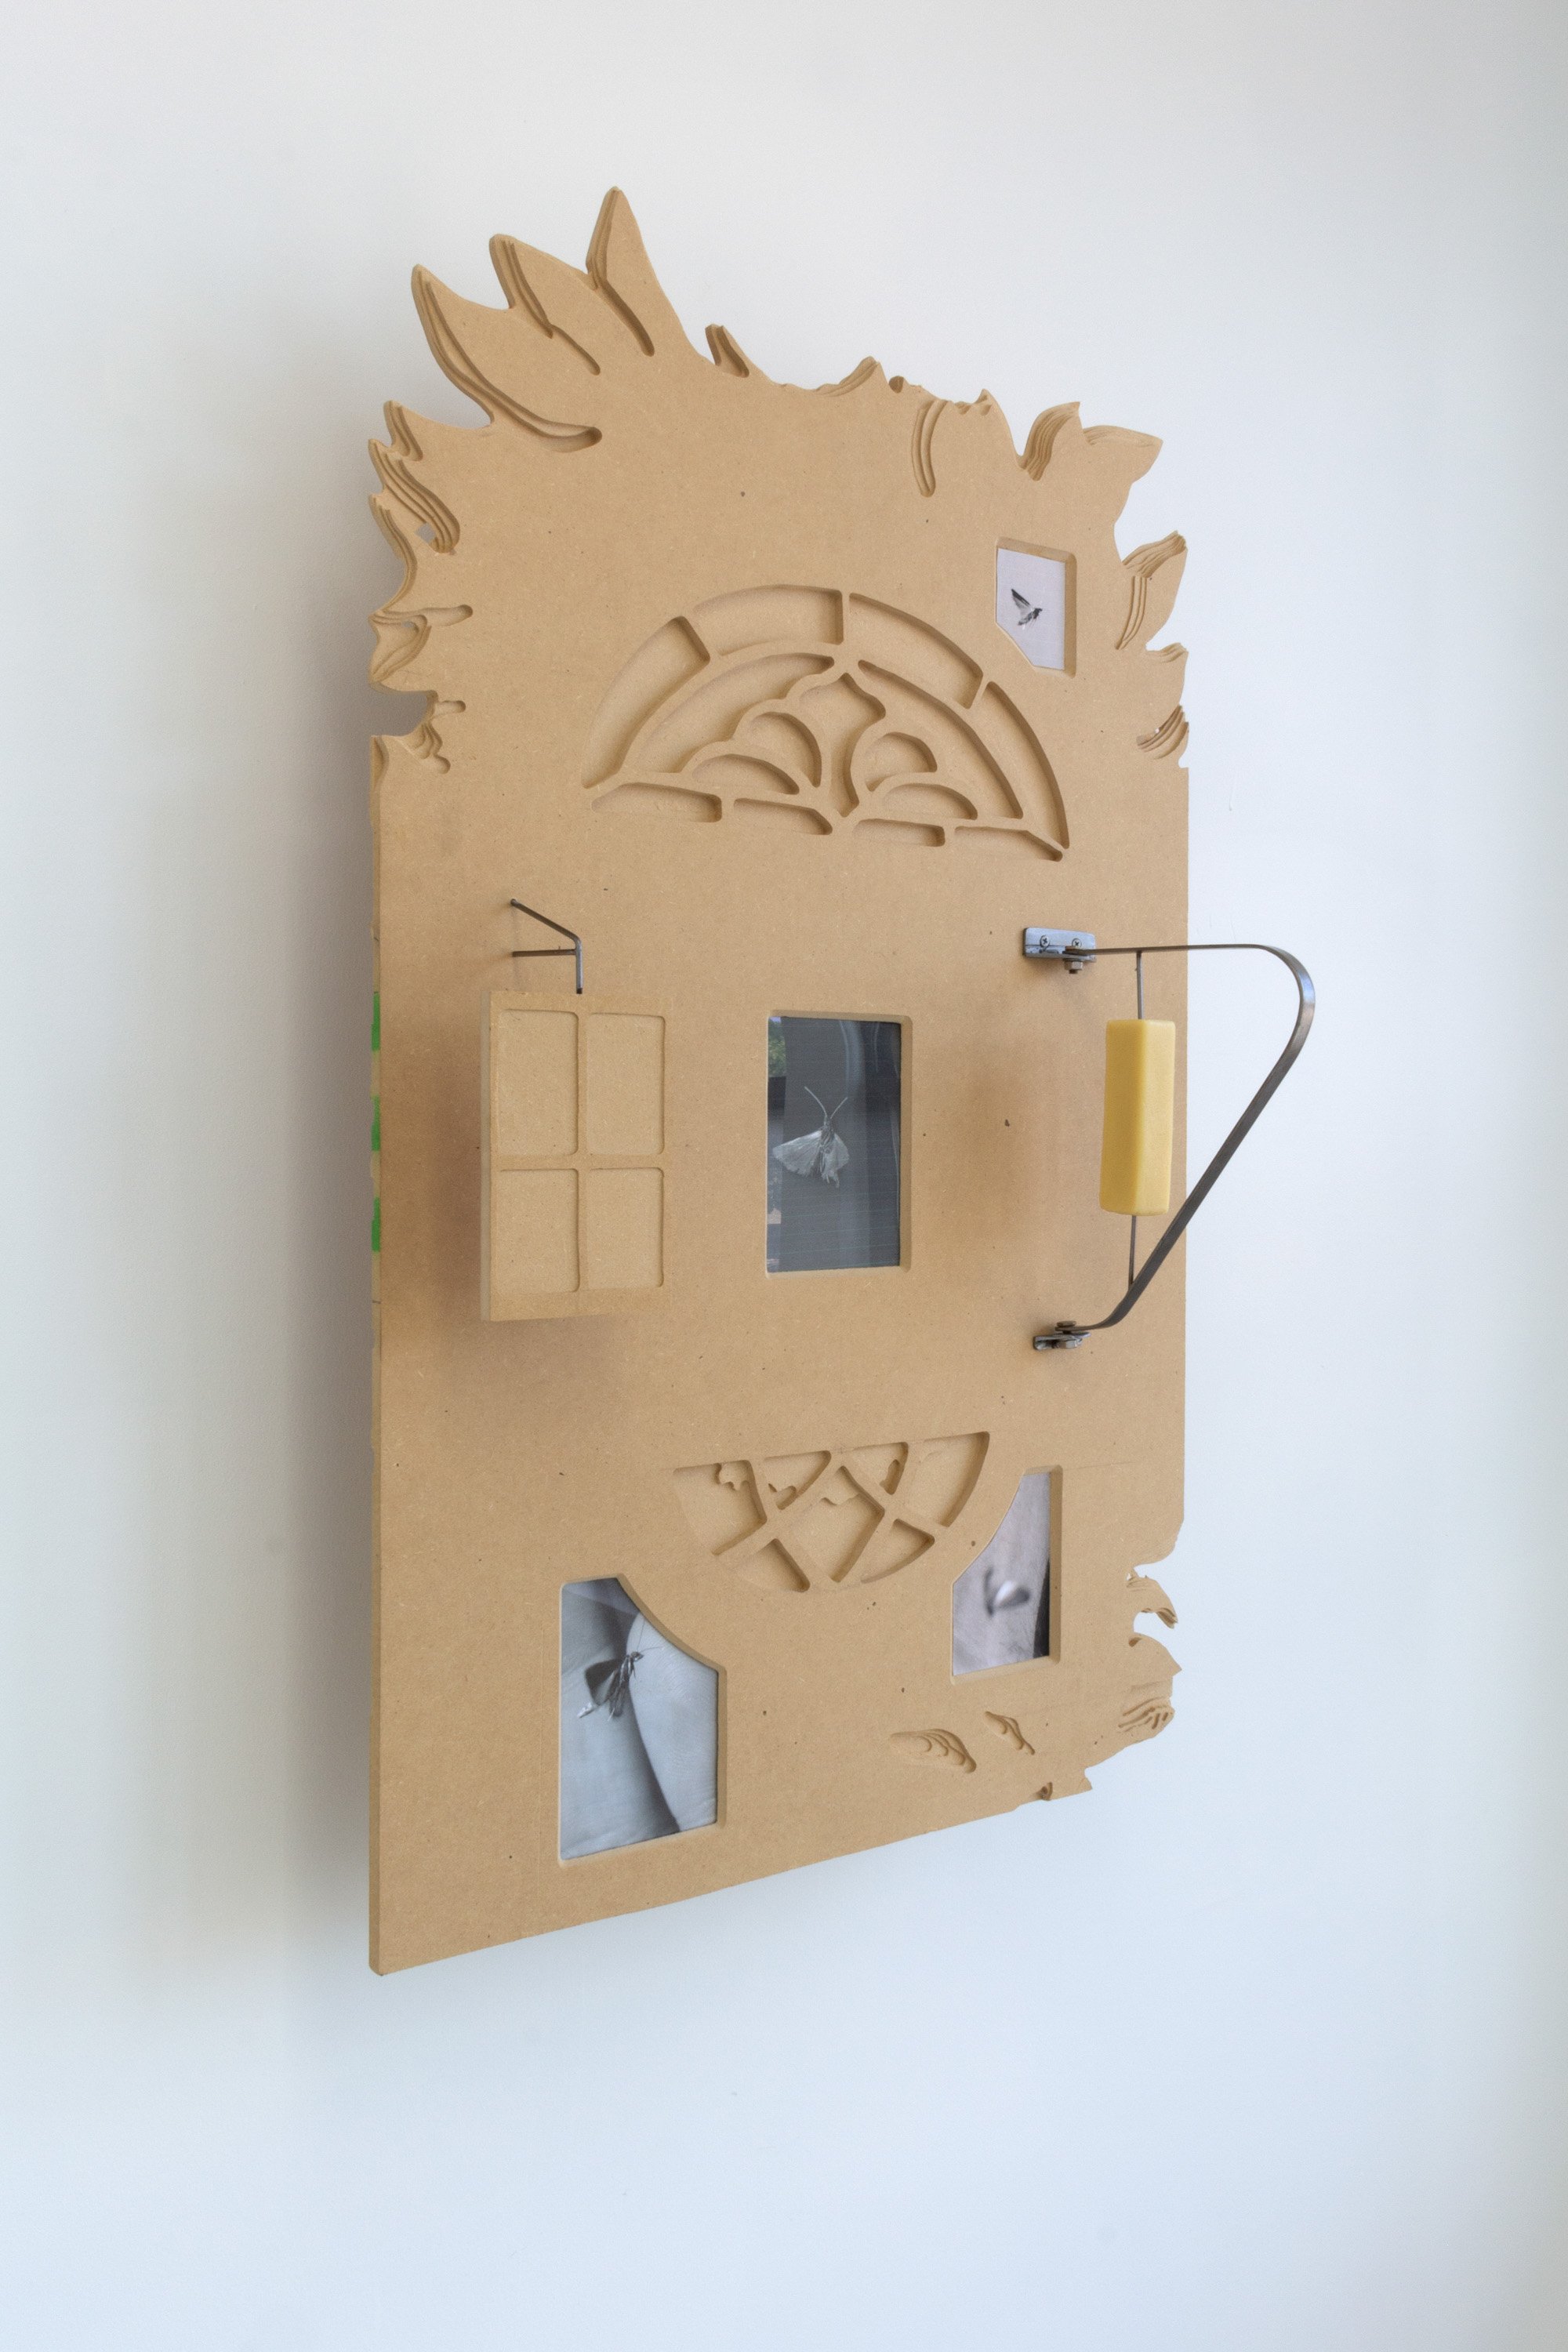  Bradley Marshall  An Imperfect Offering, A Windowless Room (Skeeeedaddle!) , 2021 Hand-cut MDF, inkjet print, steel, wax, tin can, pencil with lead replaced with steel, hardware, and adhesives 26 x 36.5 x 8 in 